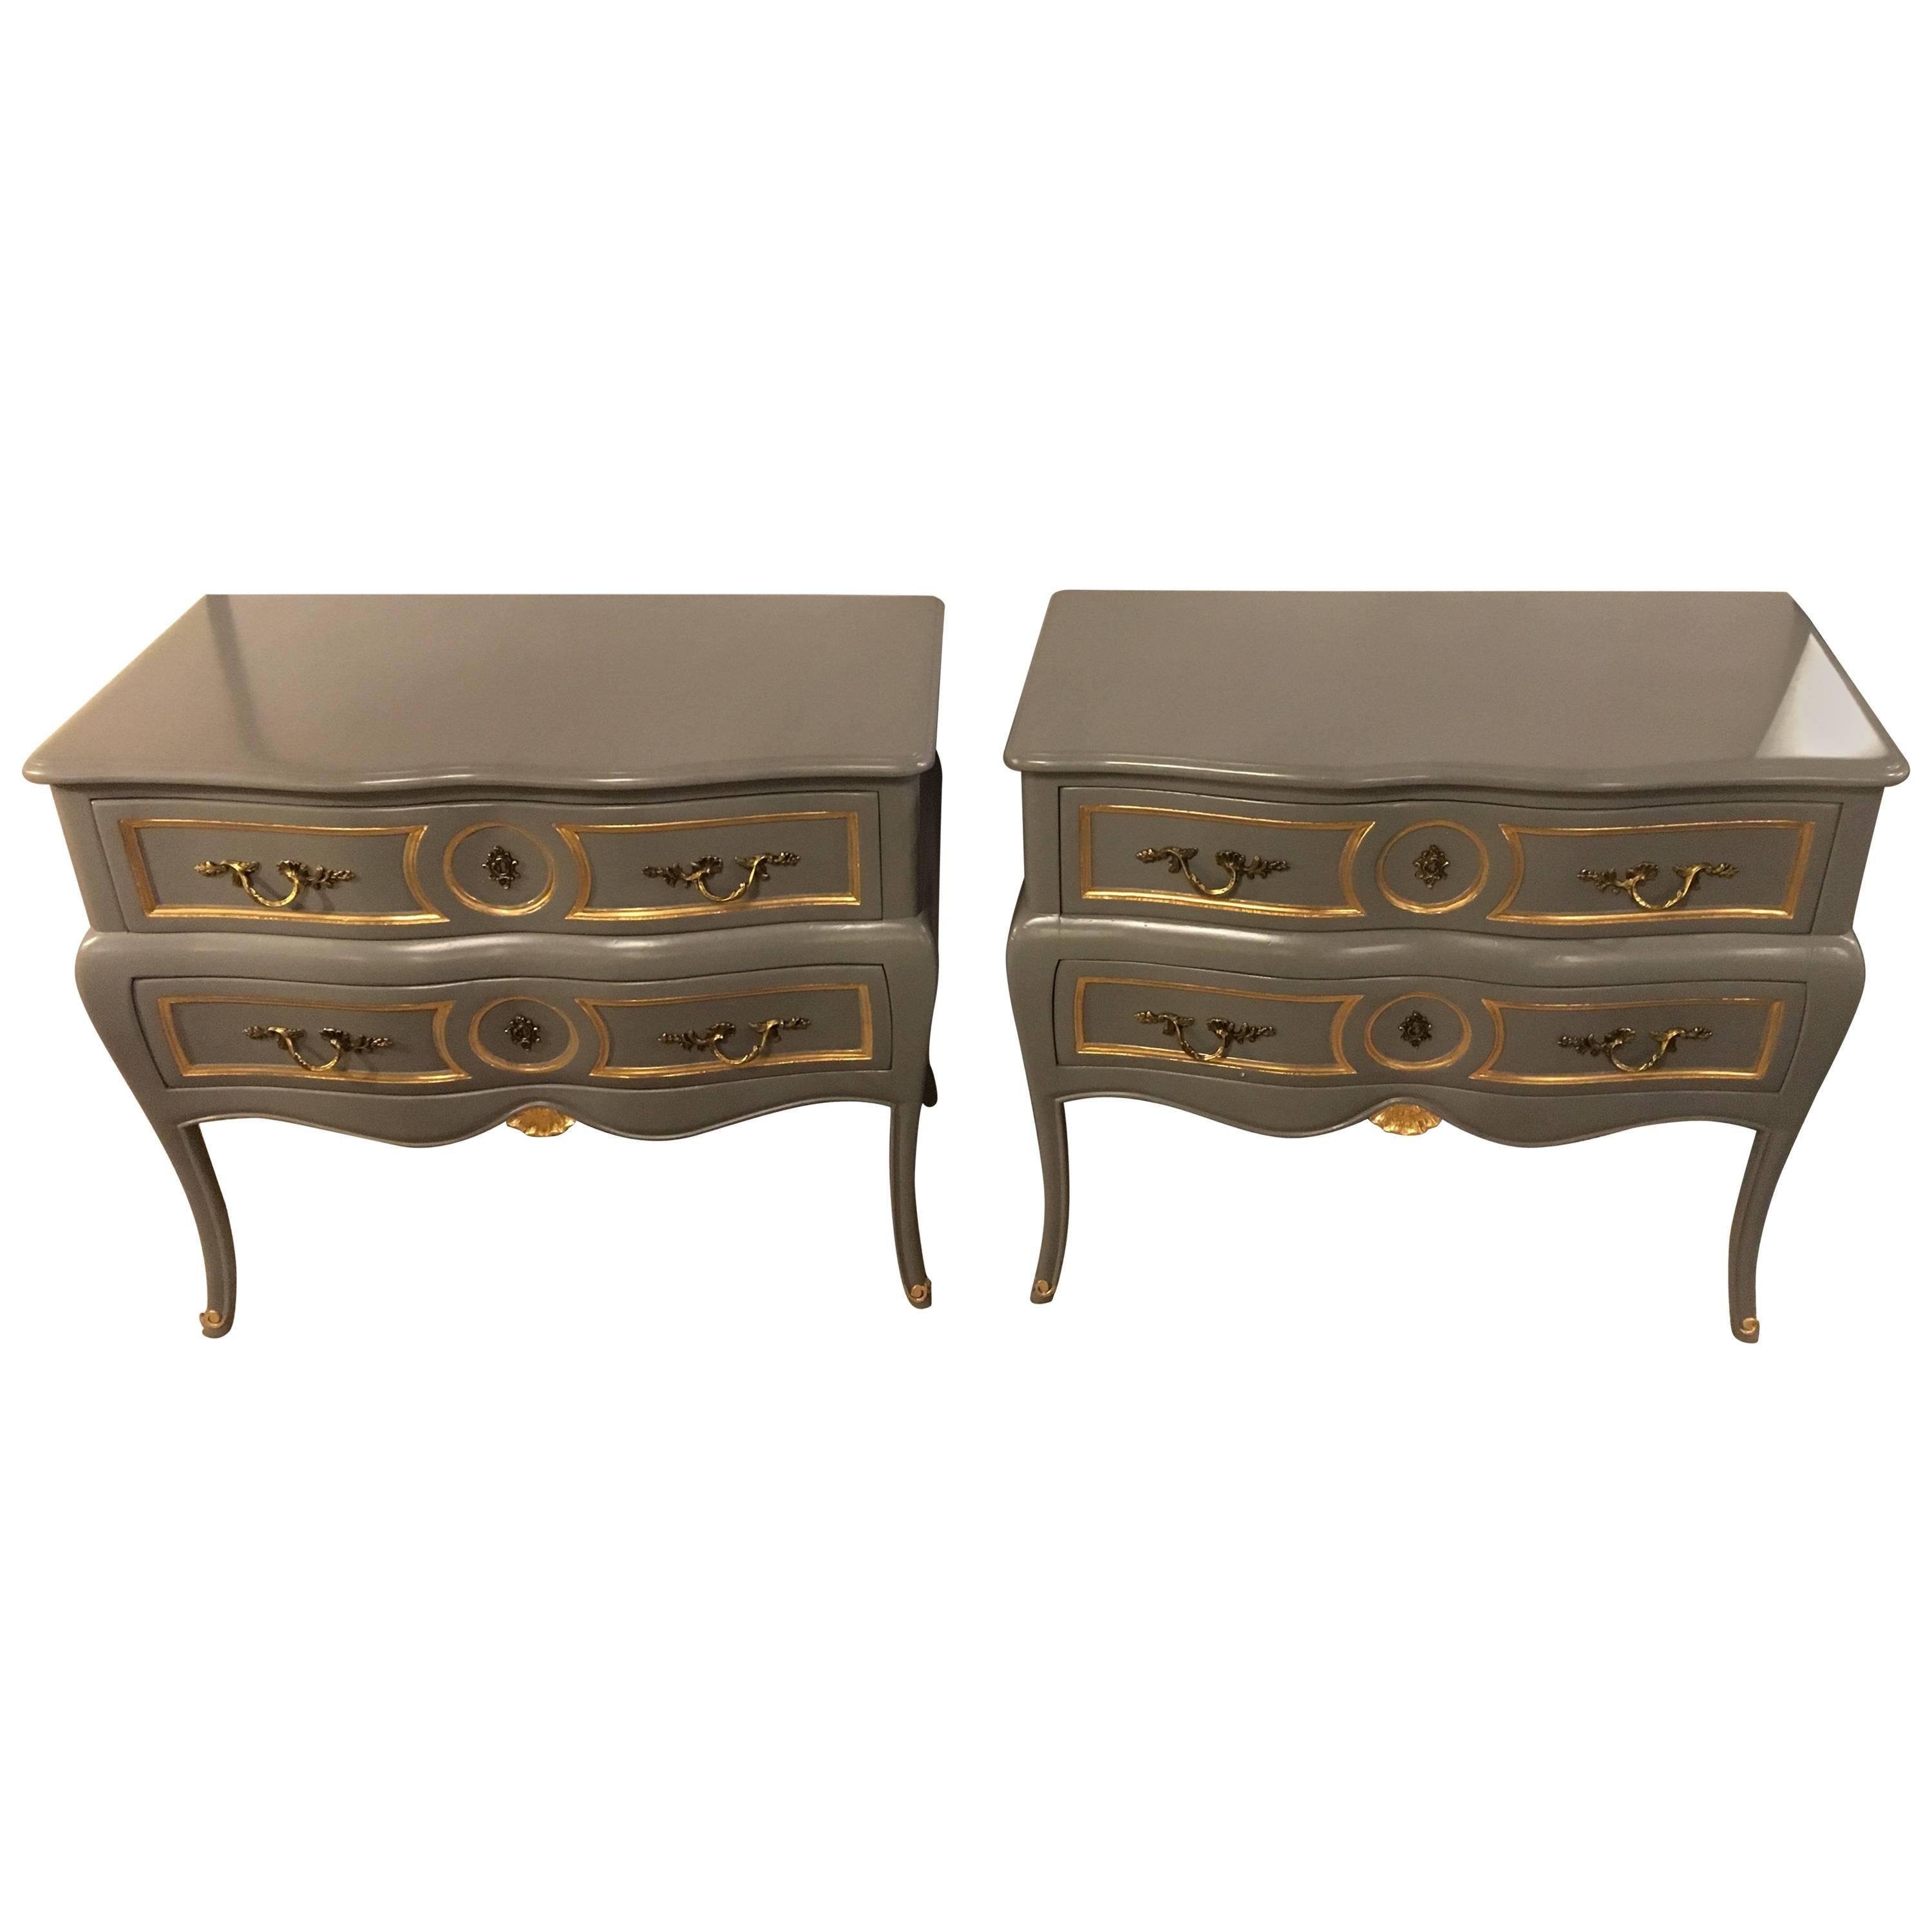 Pair of Louis XV Style Paint and Gilt Decorated Commodes Nightstands